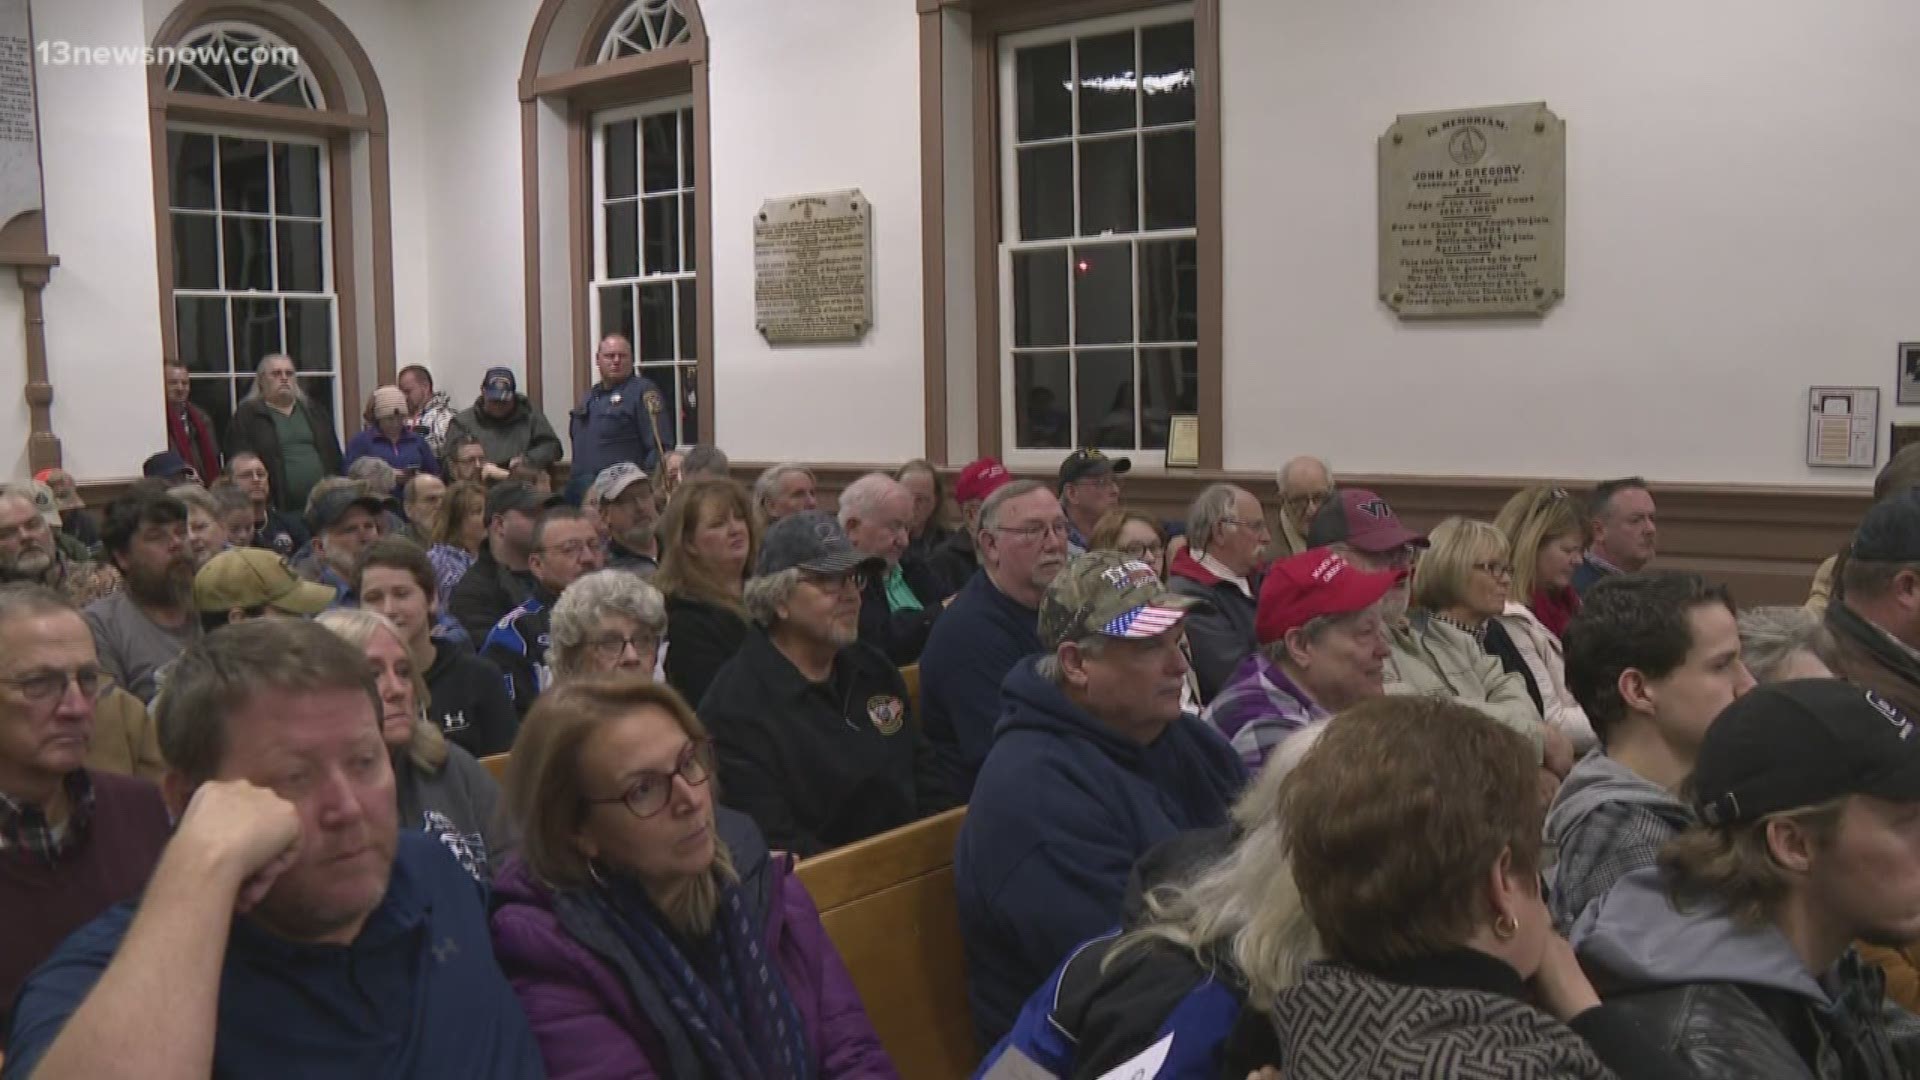 Every member of the Gloucester County Board voted in favor of the county becoming a Second Amendment Sanctuary. About 40 people spoke at the meeting.